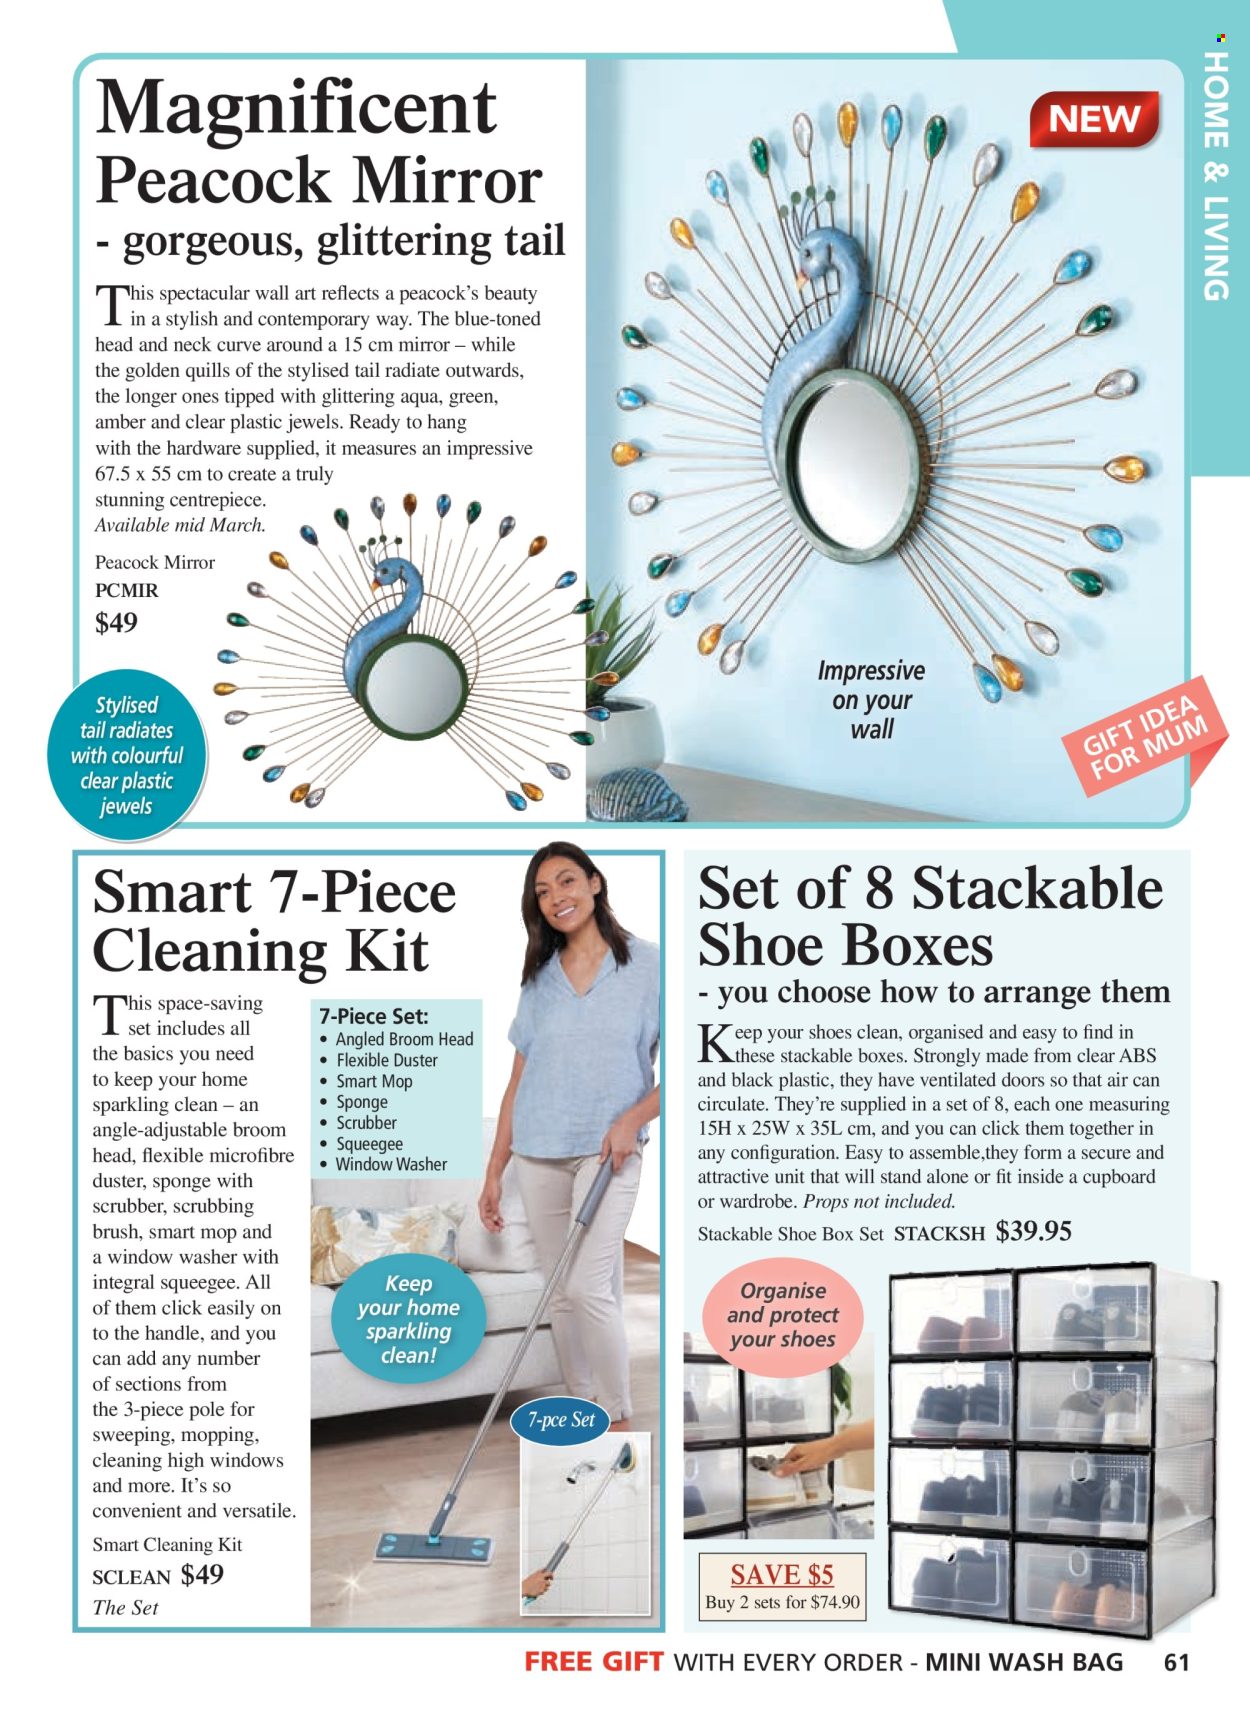 thumbnail - Innovations Catalogue - Sales products - shoe box, cleaning set, sponge, mop, duster, broom, angle broom, window washer, bag. Page 61.